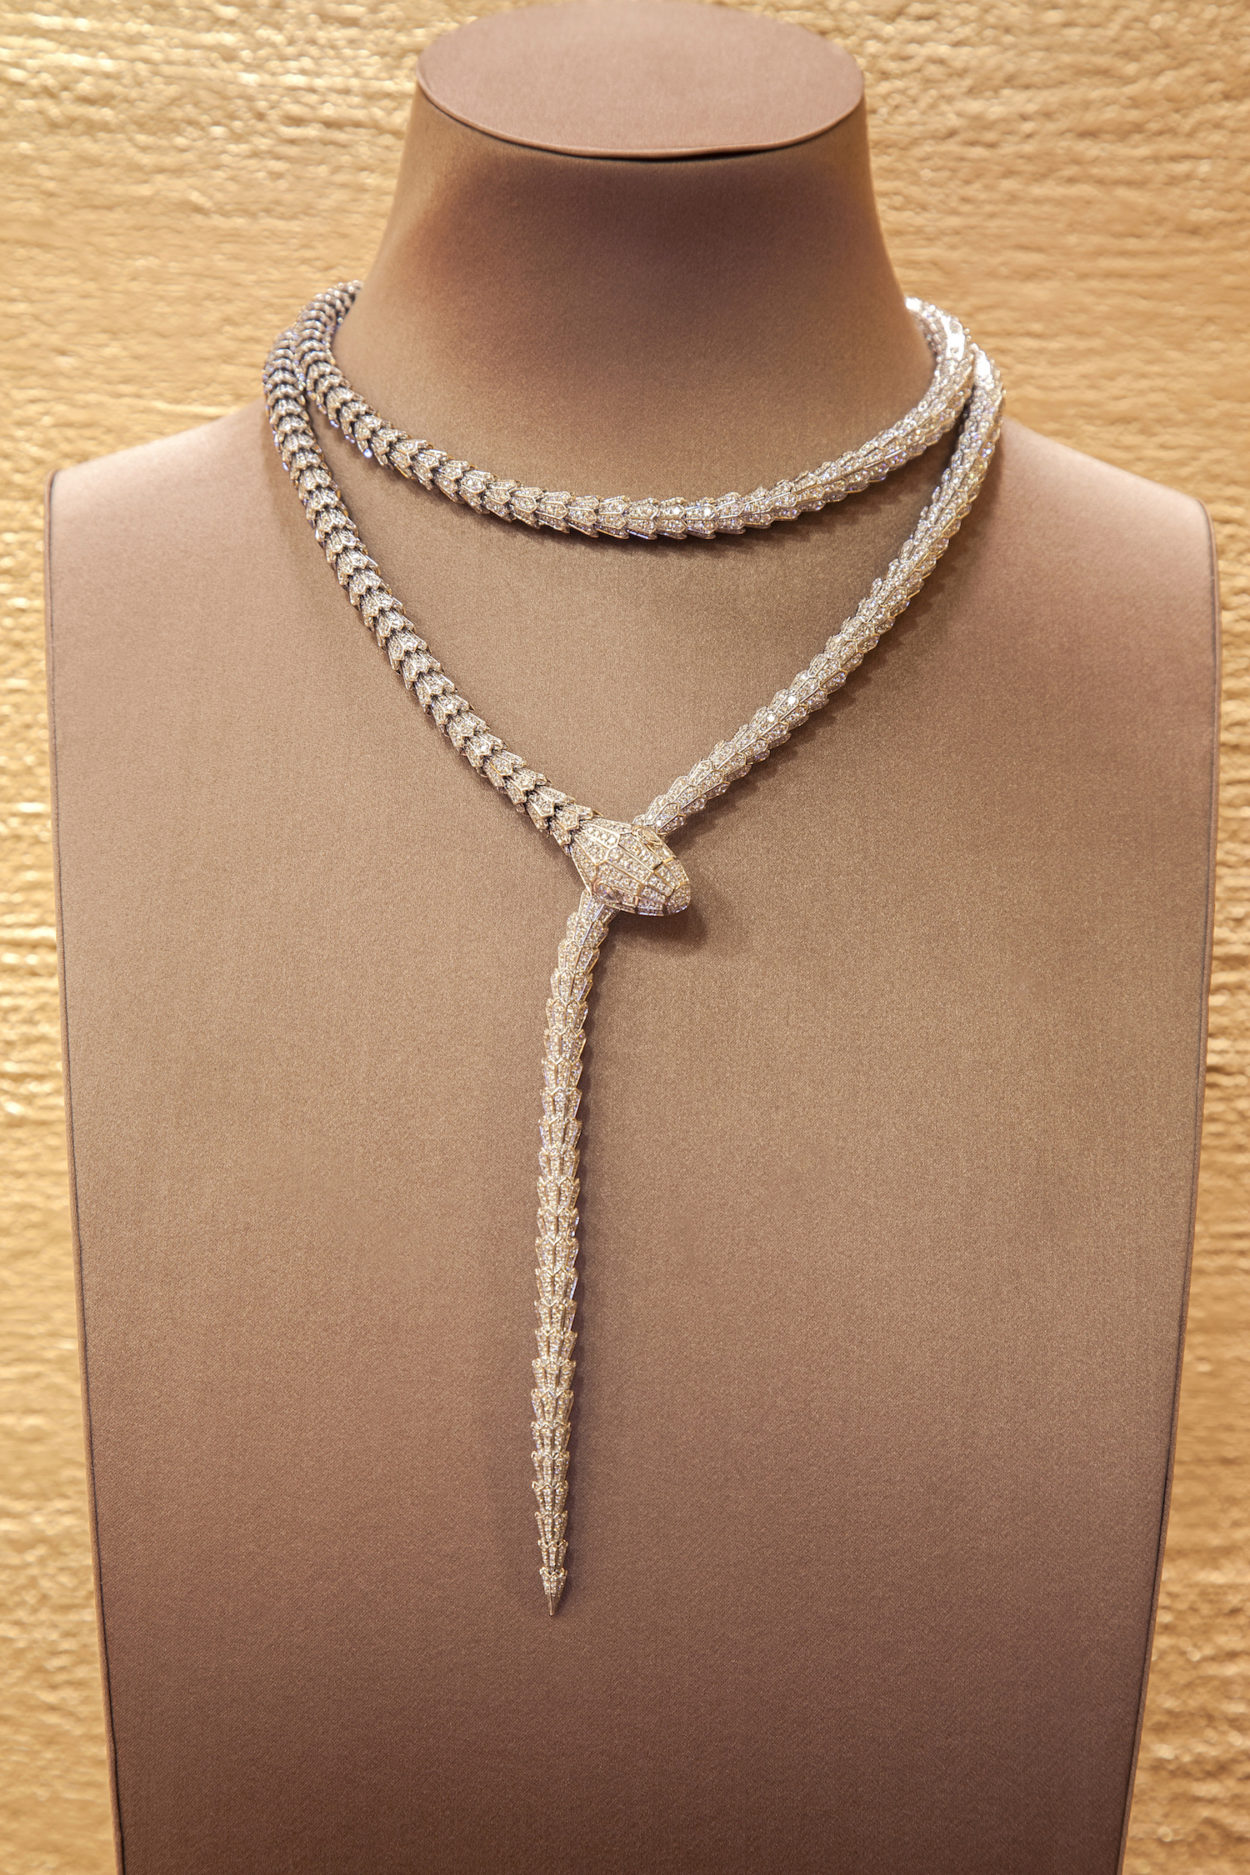 how much is bulgari serpenti necklace